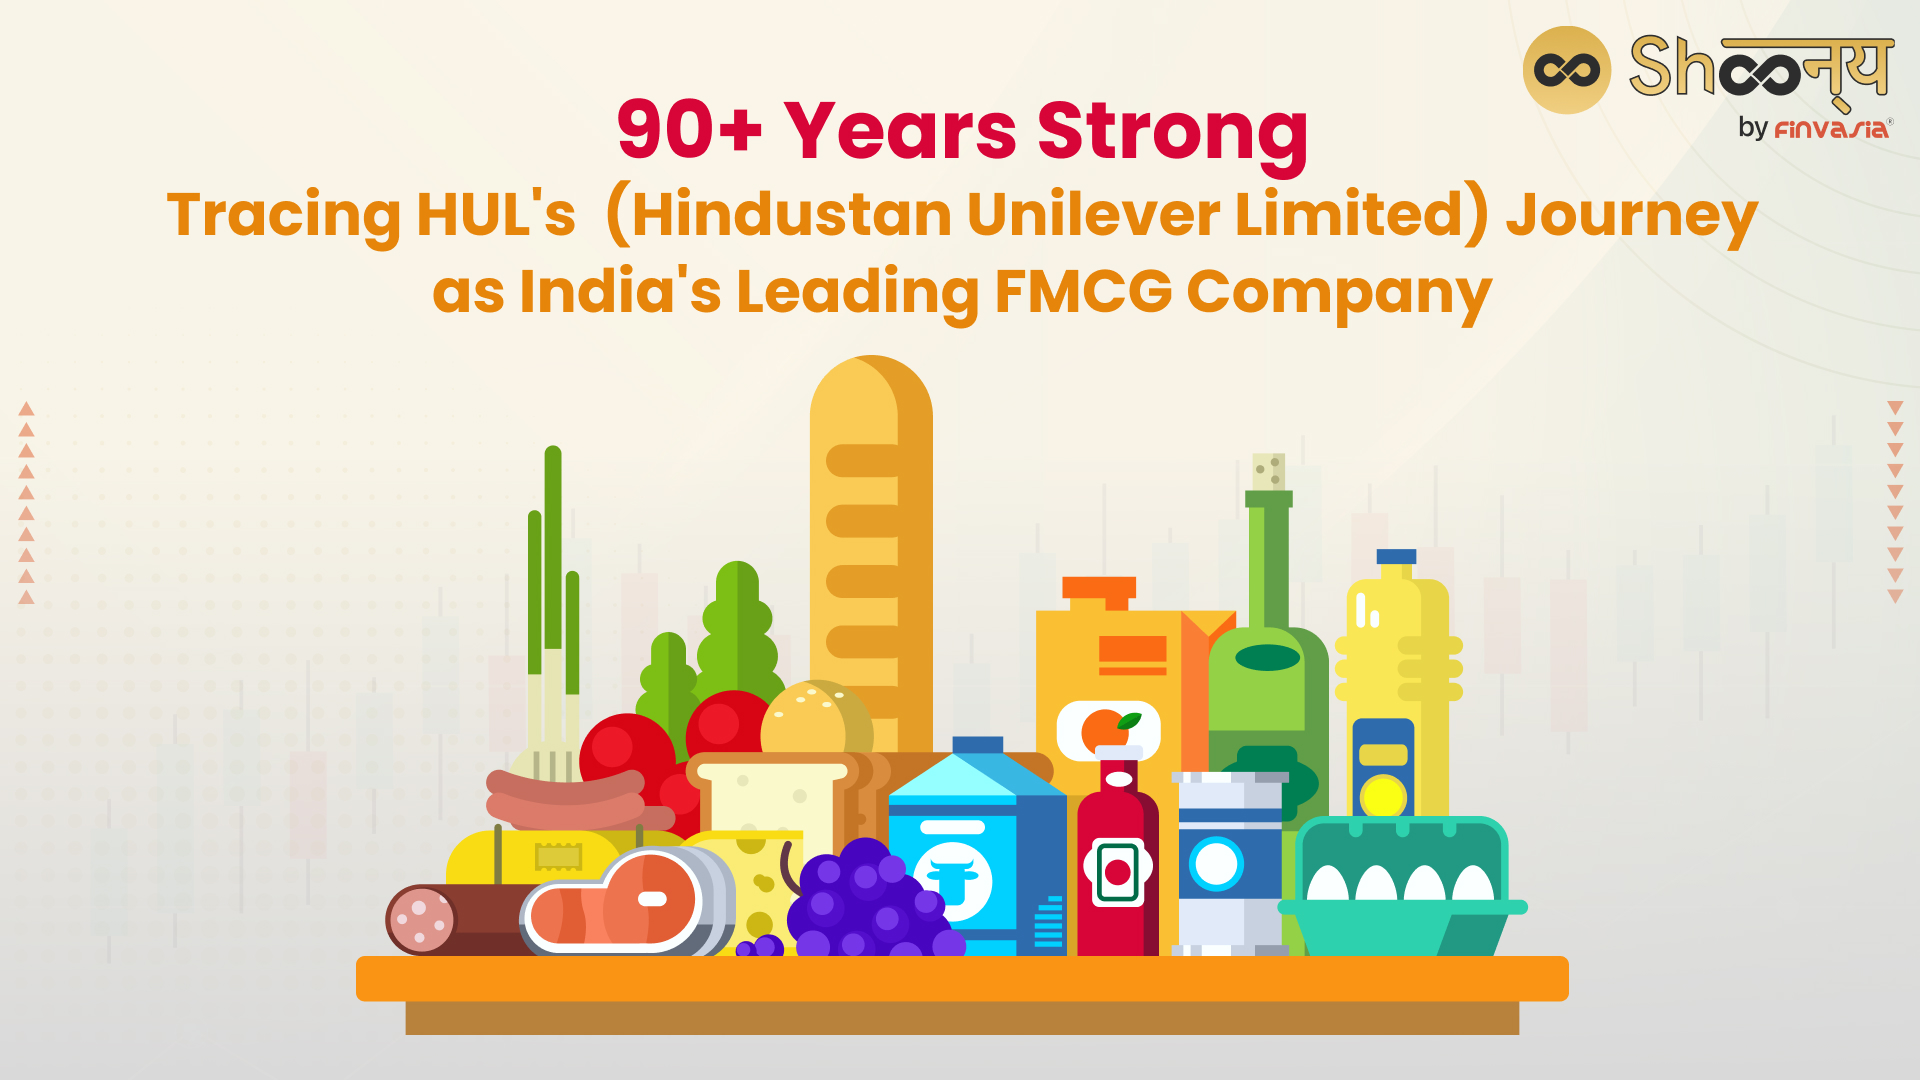 History of Hindustan Unilever Limited| Founder, Products, Popular Brands